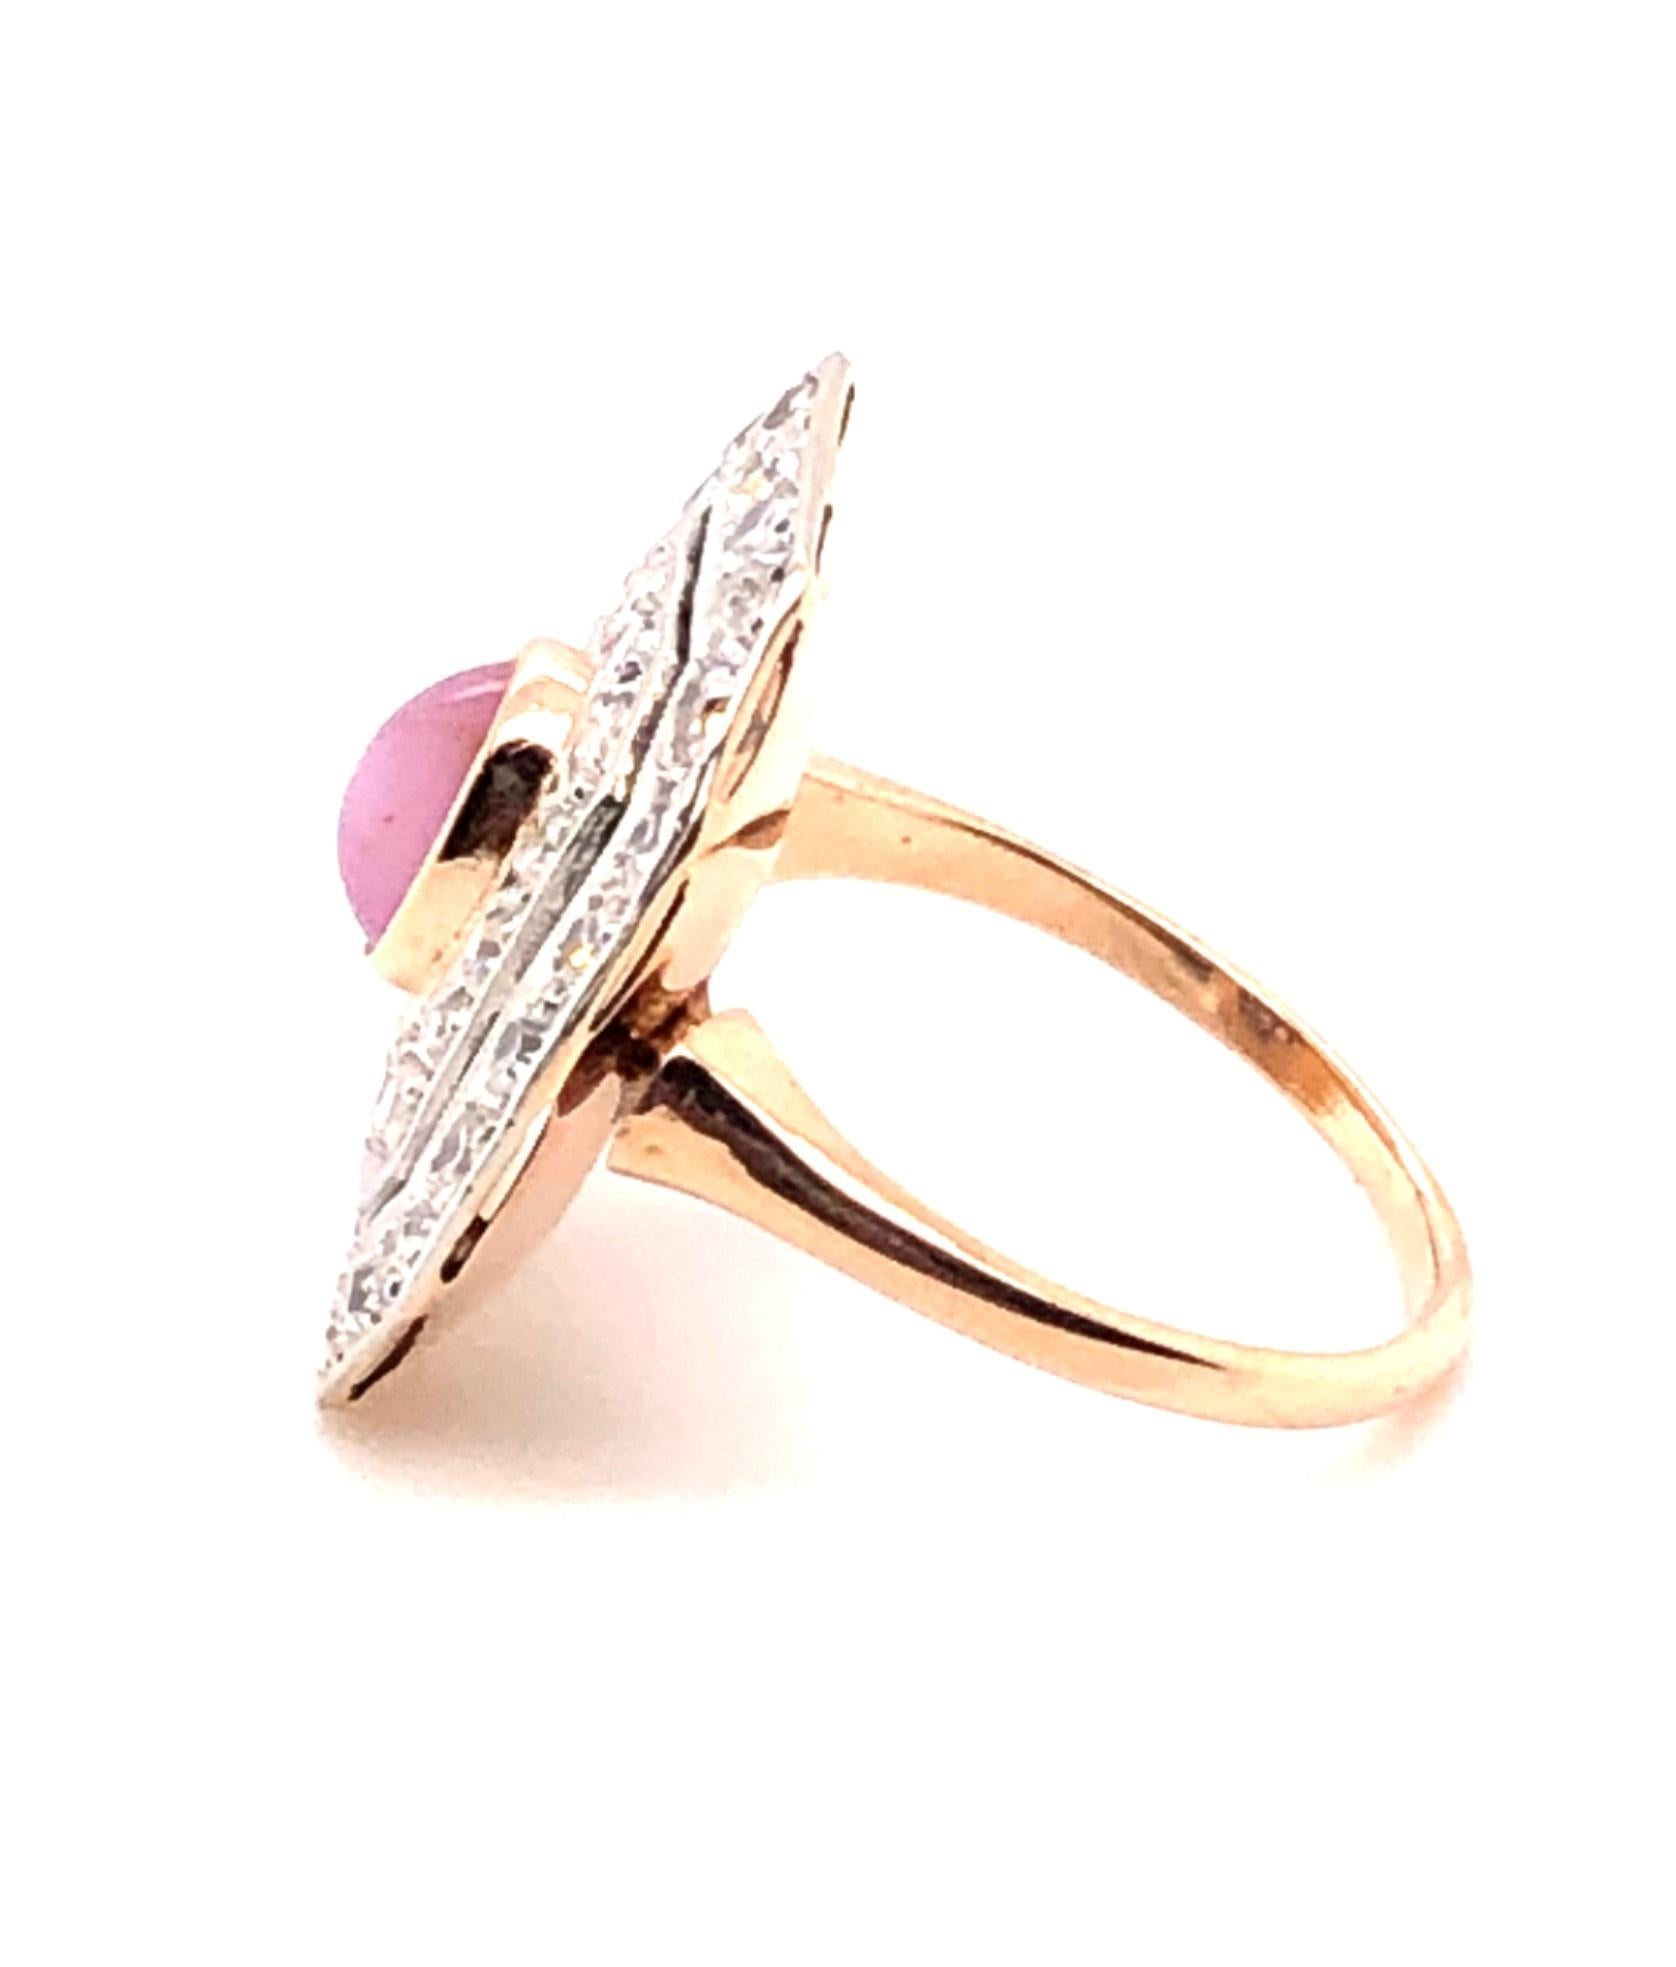 Fantastic original Edwardian ring. (The time period of Downton Abby). The ring contains a yellow gold bezel set natural 1.16 carat oval start ruby. Set in platinum on the top of the ring in a rectangle are approximately 1.26 carat Old European Cut